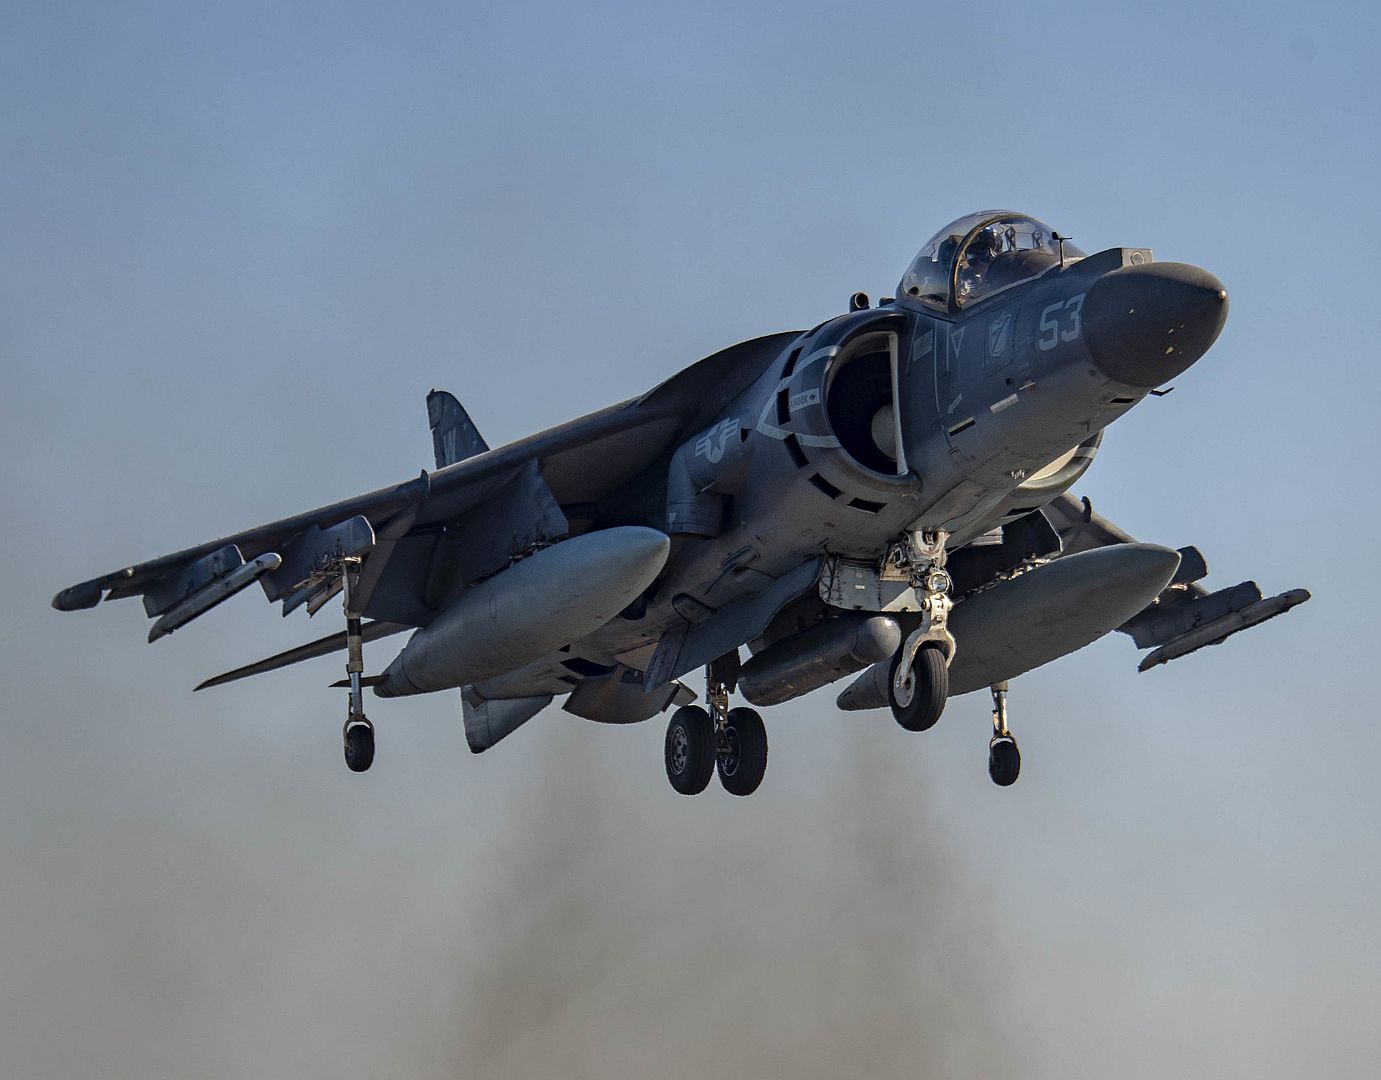 8B Harrier Attached To Marine Attack Squadron 214 11th Marine Expeditionary Unit As It Lands On The Flight Deck Of The Amphibious Assault Ship USS Essex